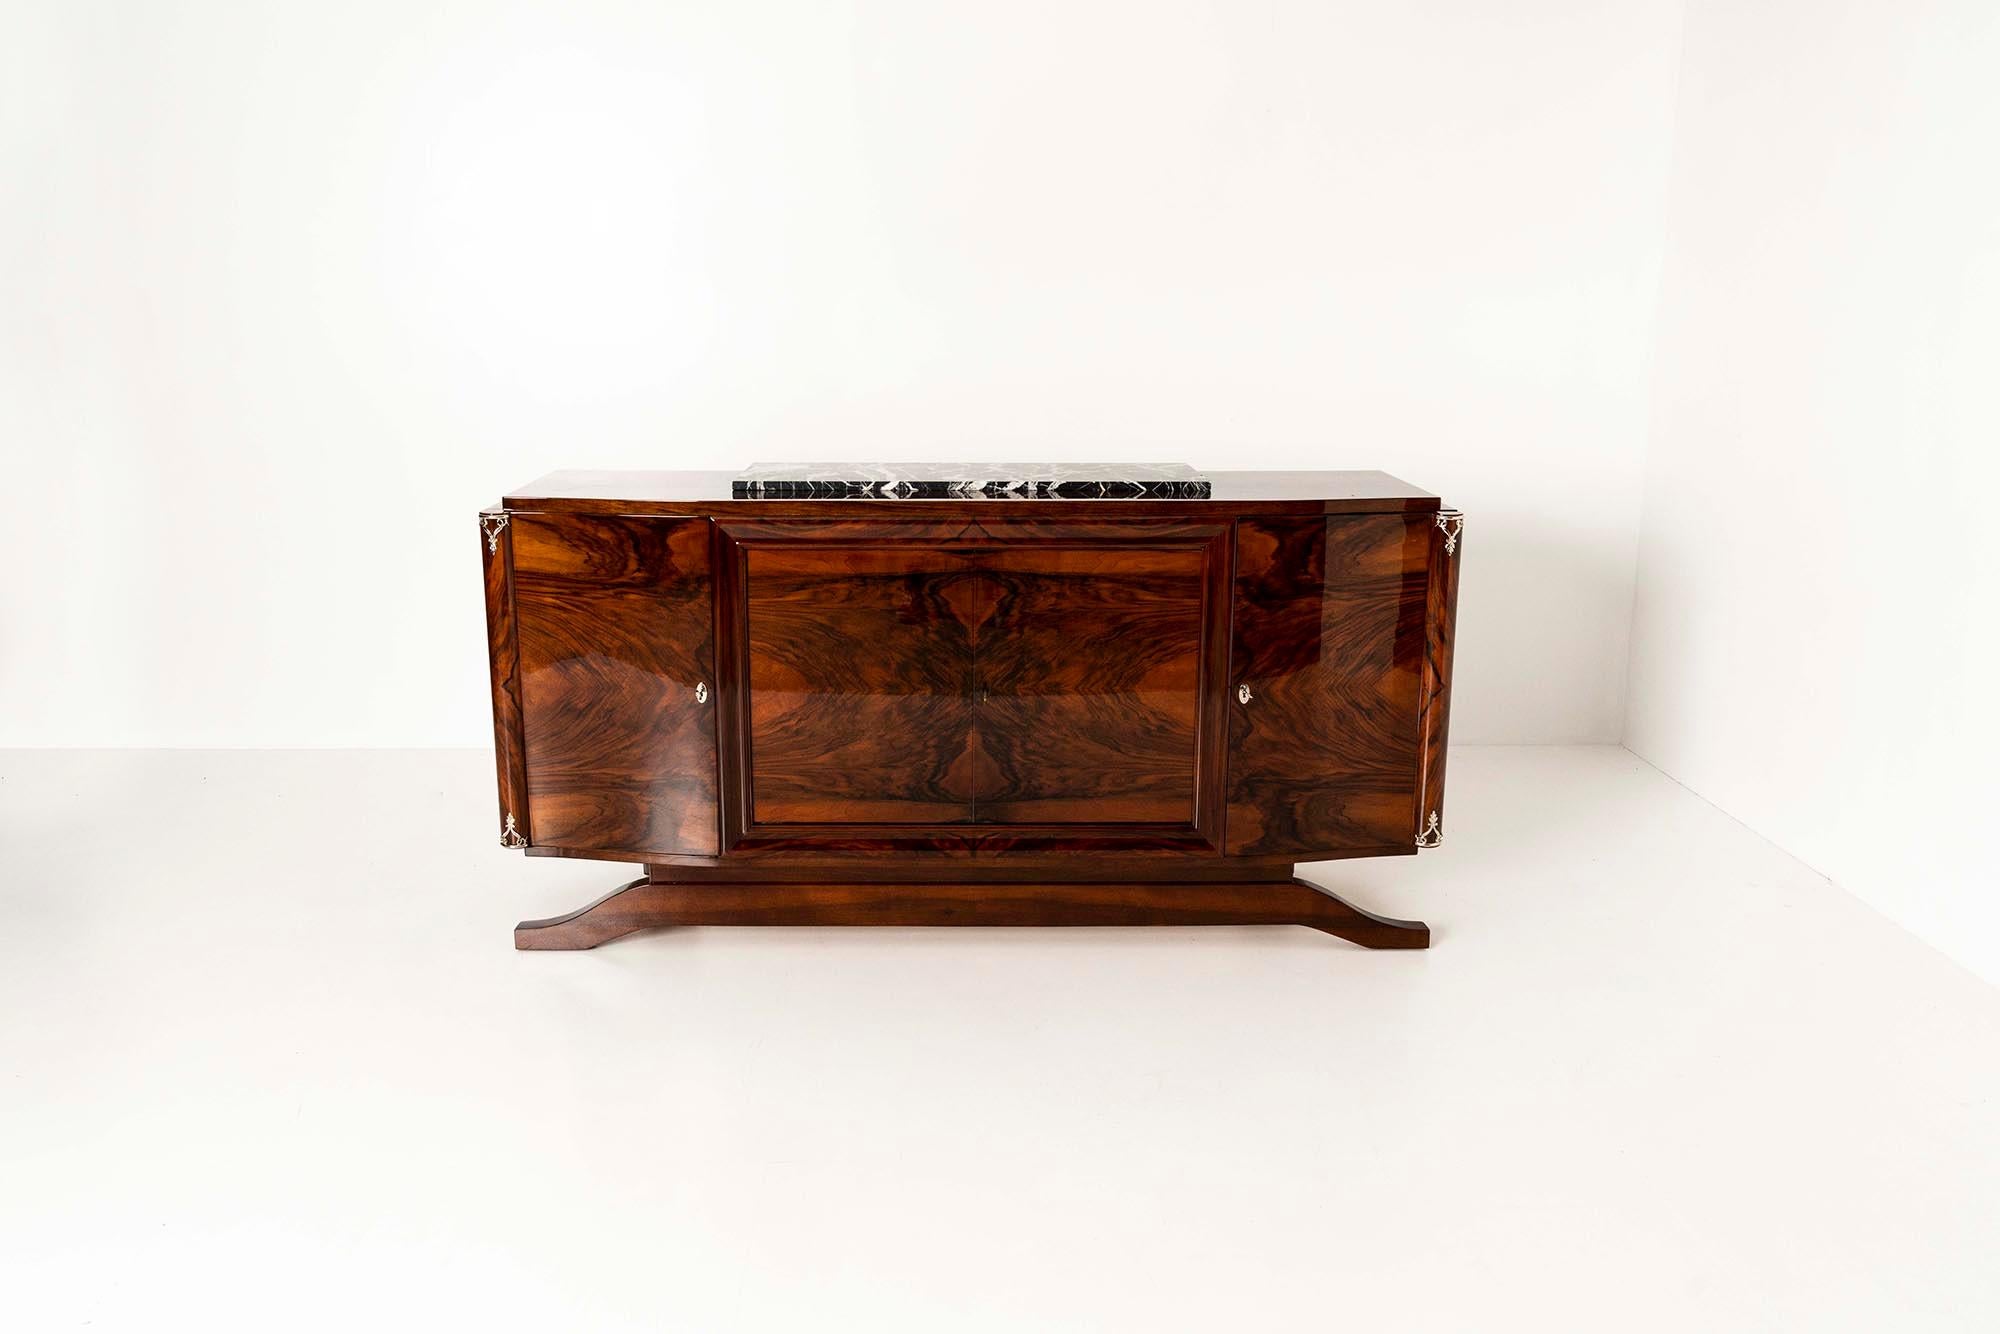 A very eye-catching French Art Deco sideboard of size and precisely manufactured in the 1930s. The highest quality walnut wood has been used for this copy. On all four door panels, the veneer, which shows a dramatic drawing, is beautifully mirrored.